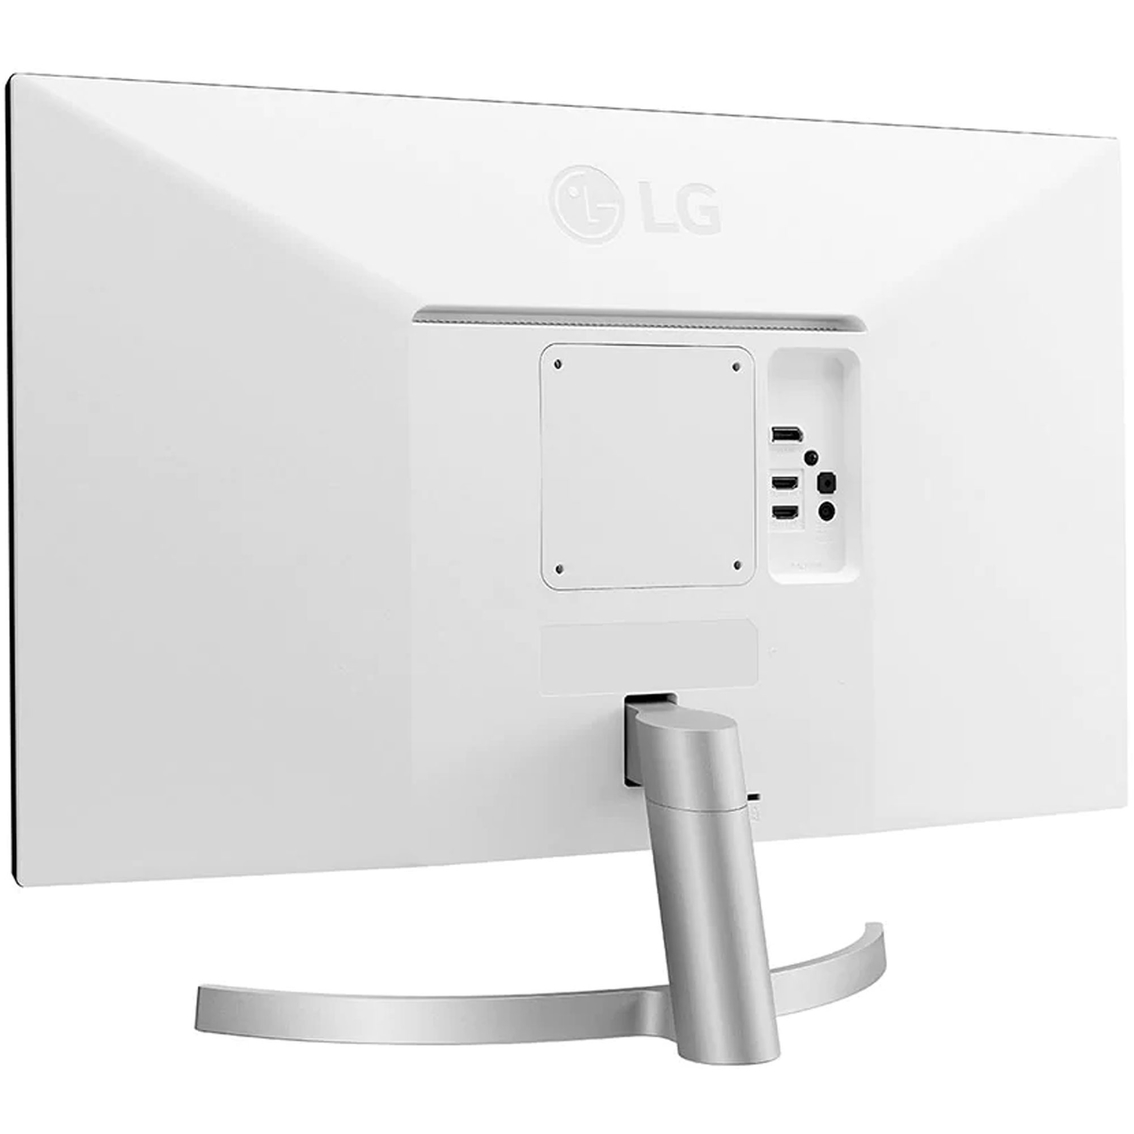 LG 27 in. 4K UHD IPS LED Monitor with HDR - Image 6 of 7